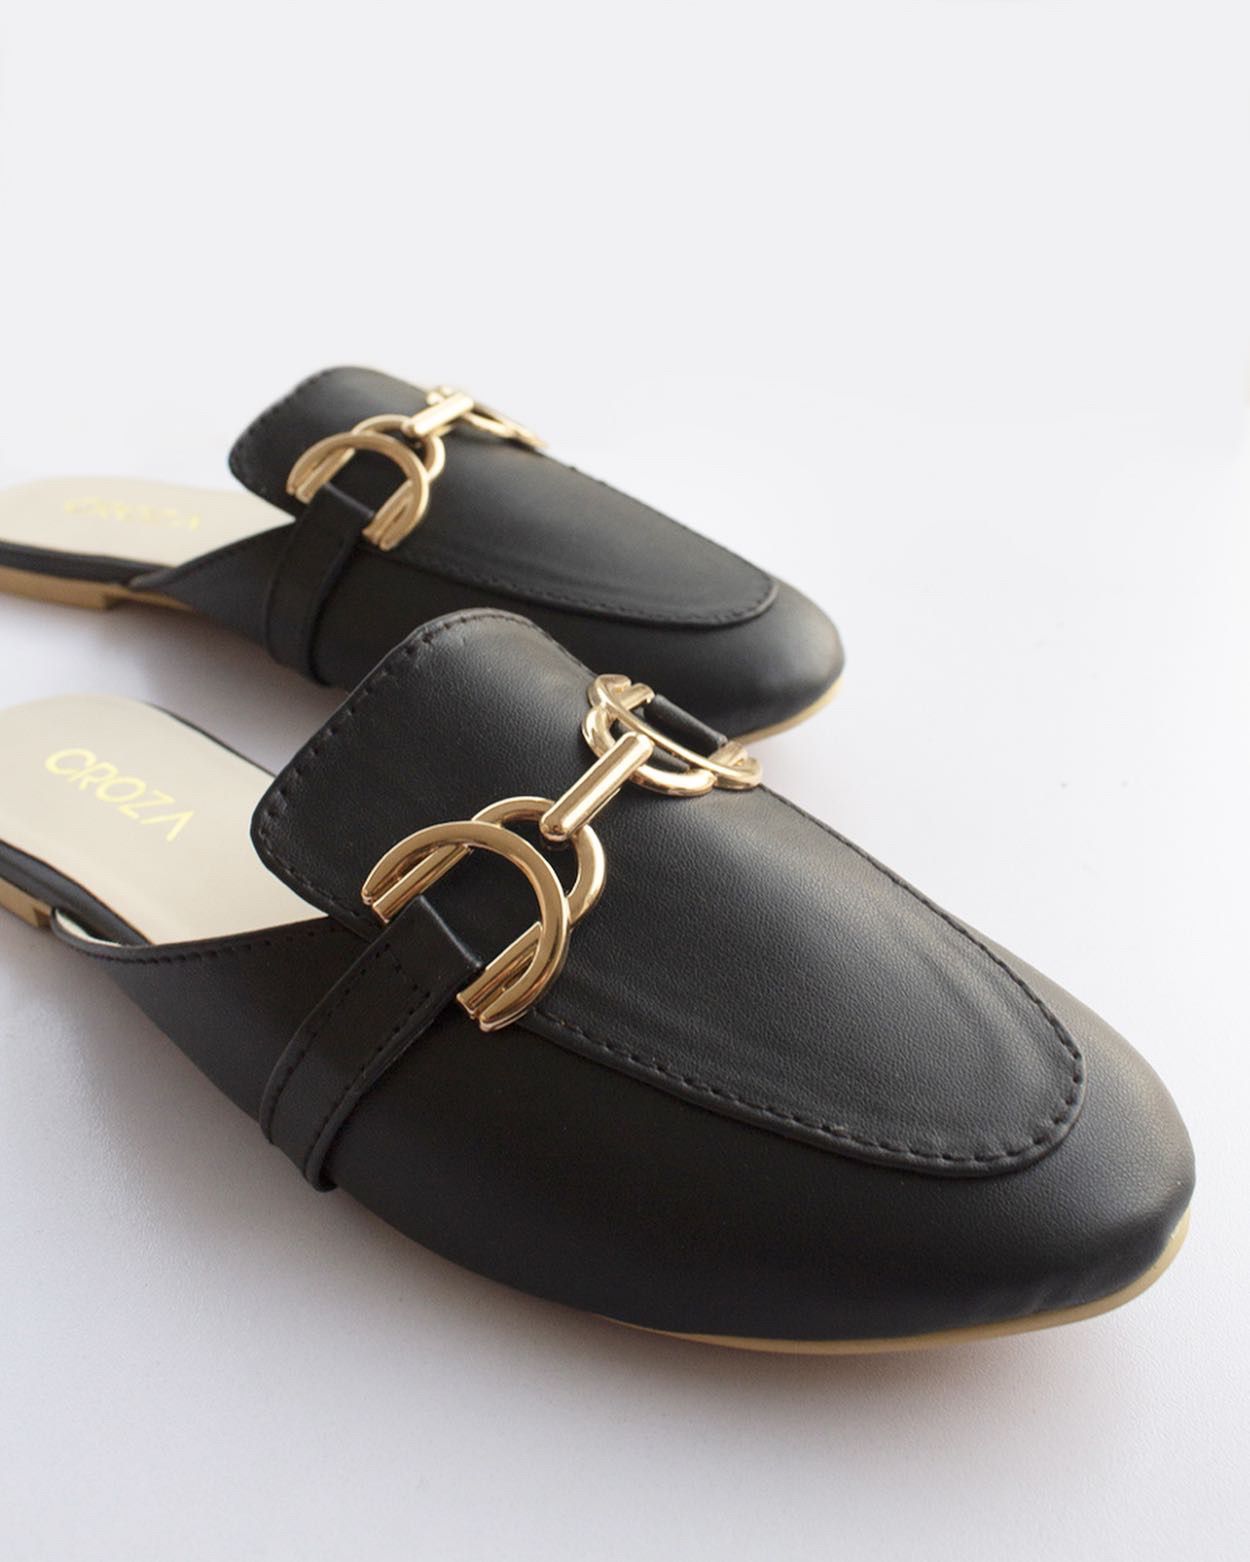 Black mules with golden accessory